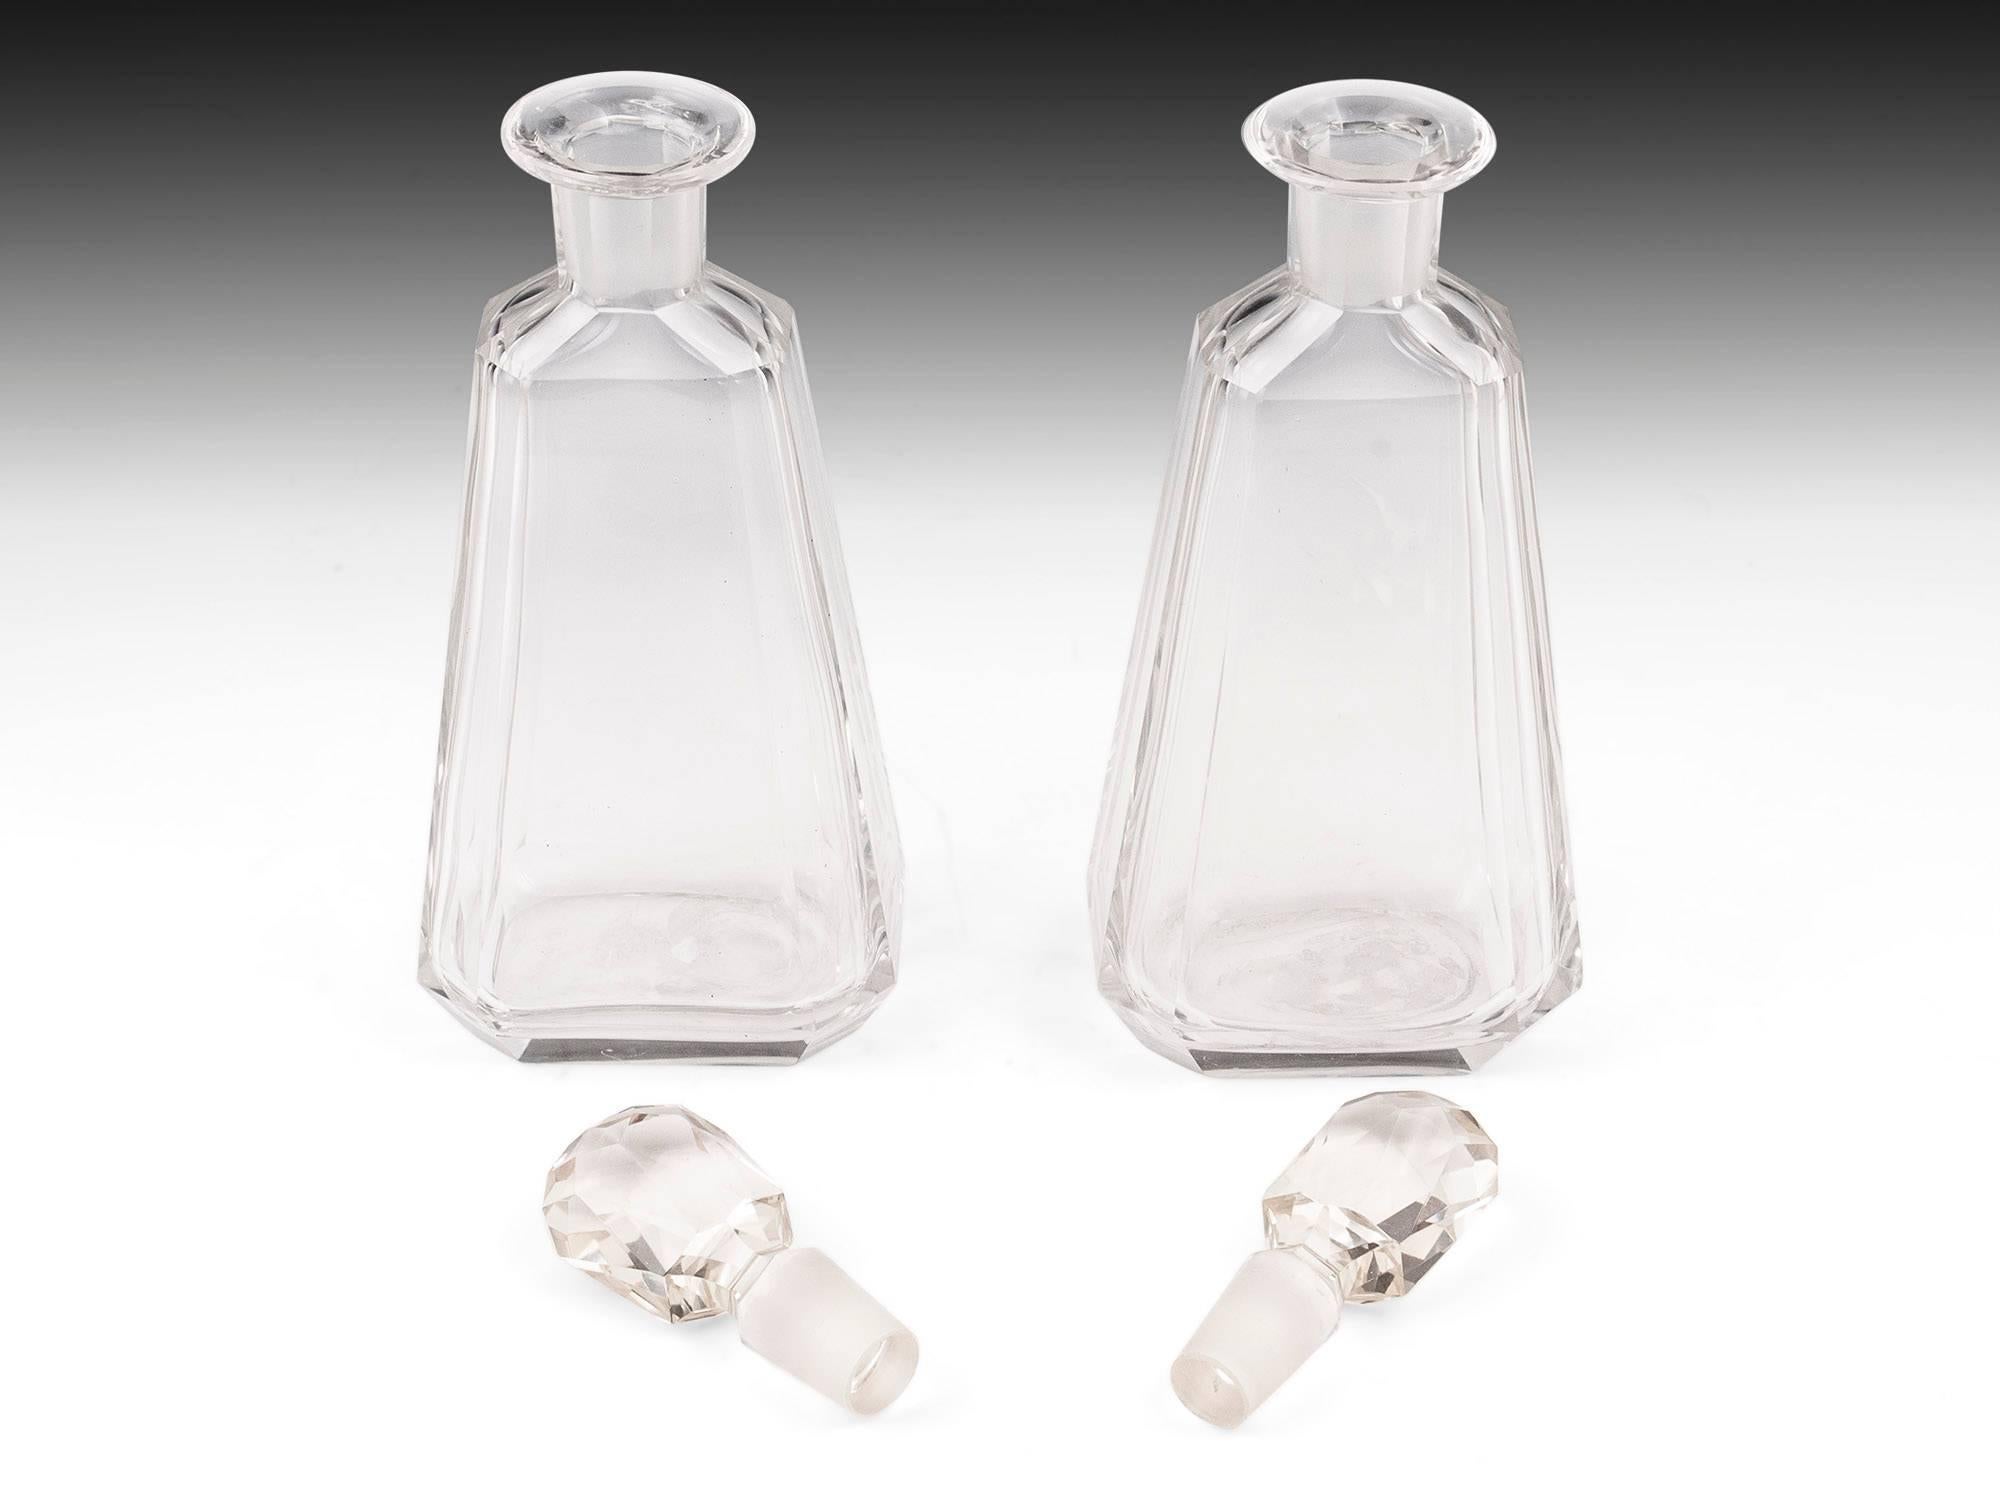 20th Century Pair of Stylish Art Deco Glass Lead Crystal Decanters